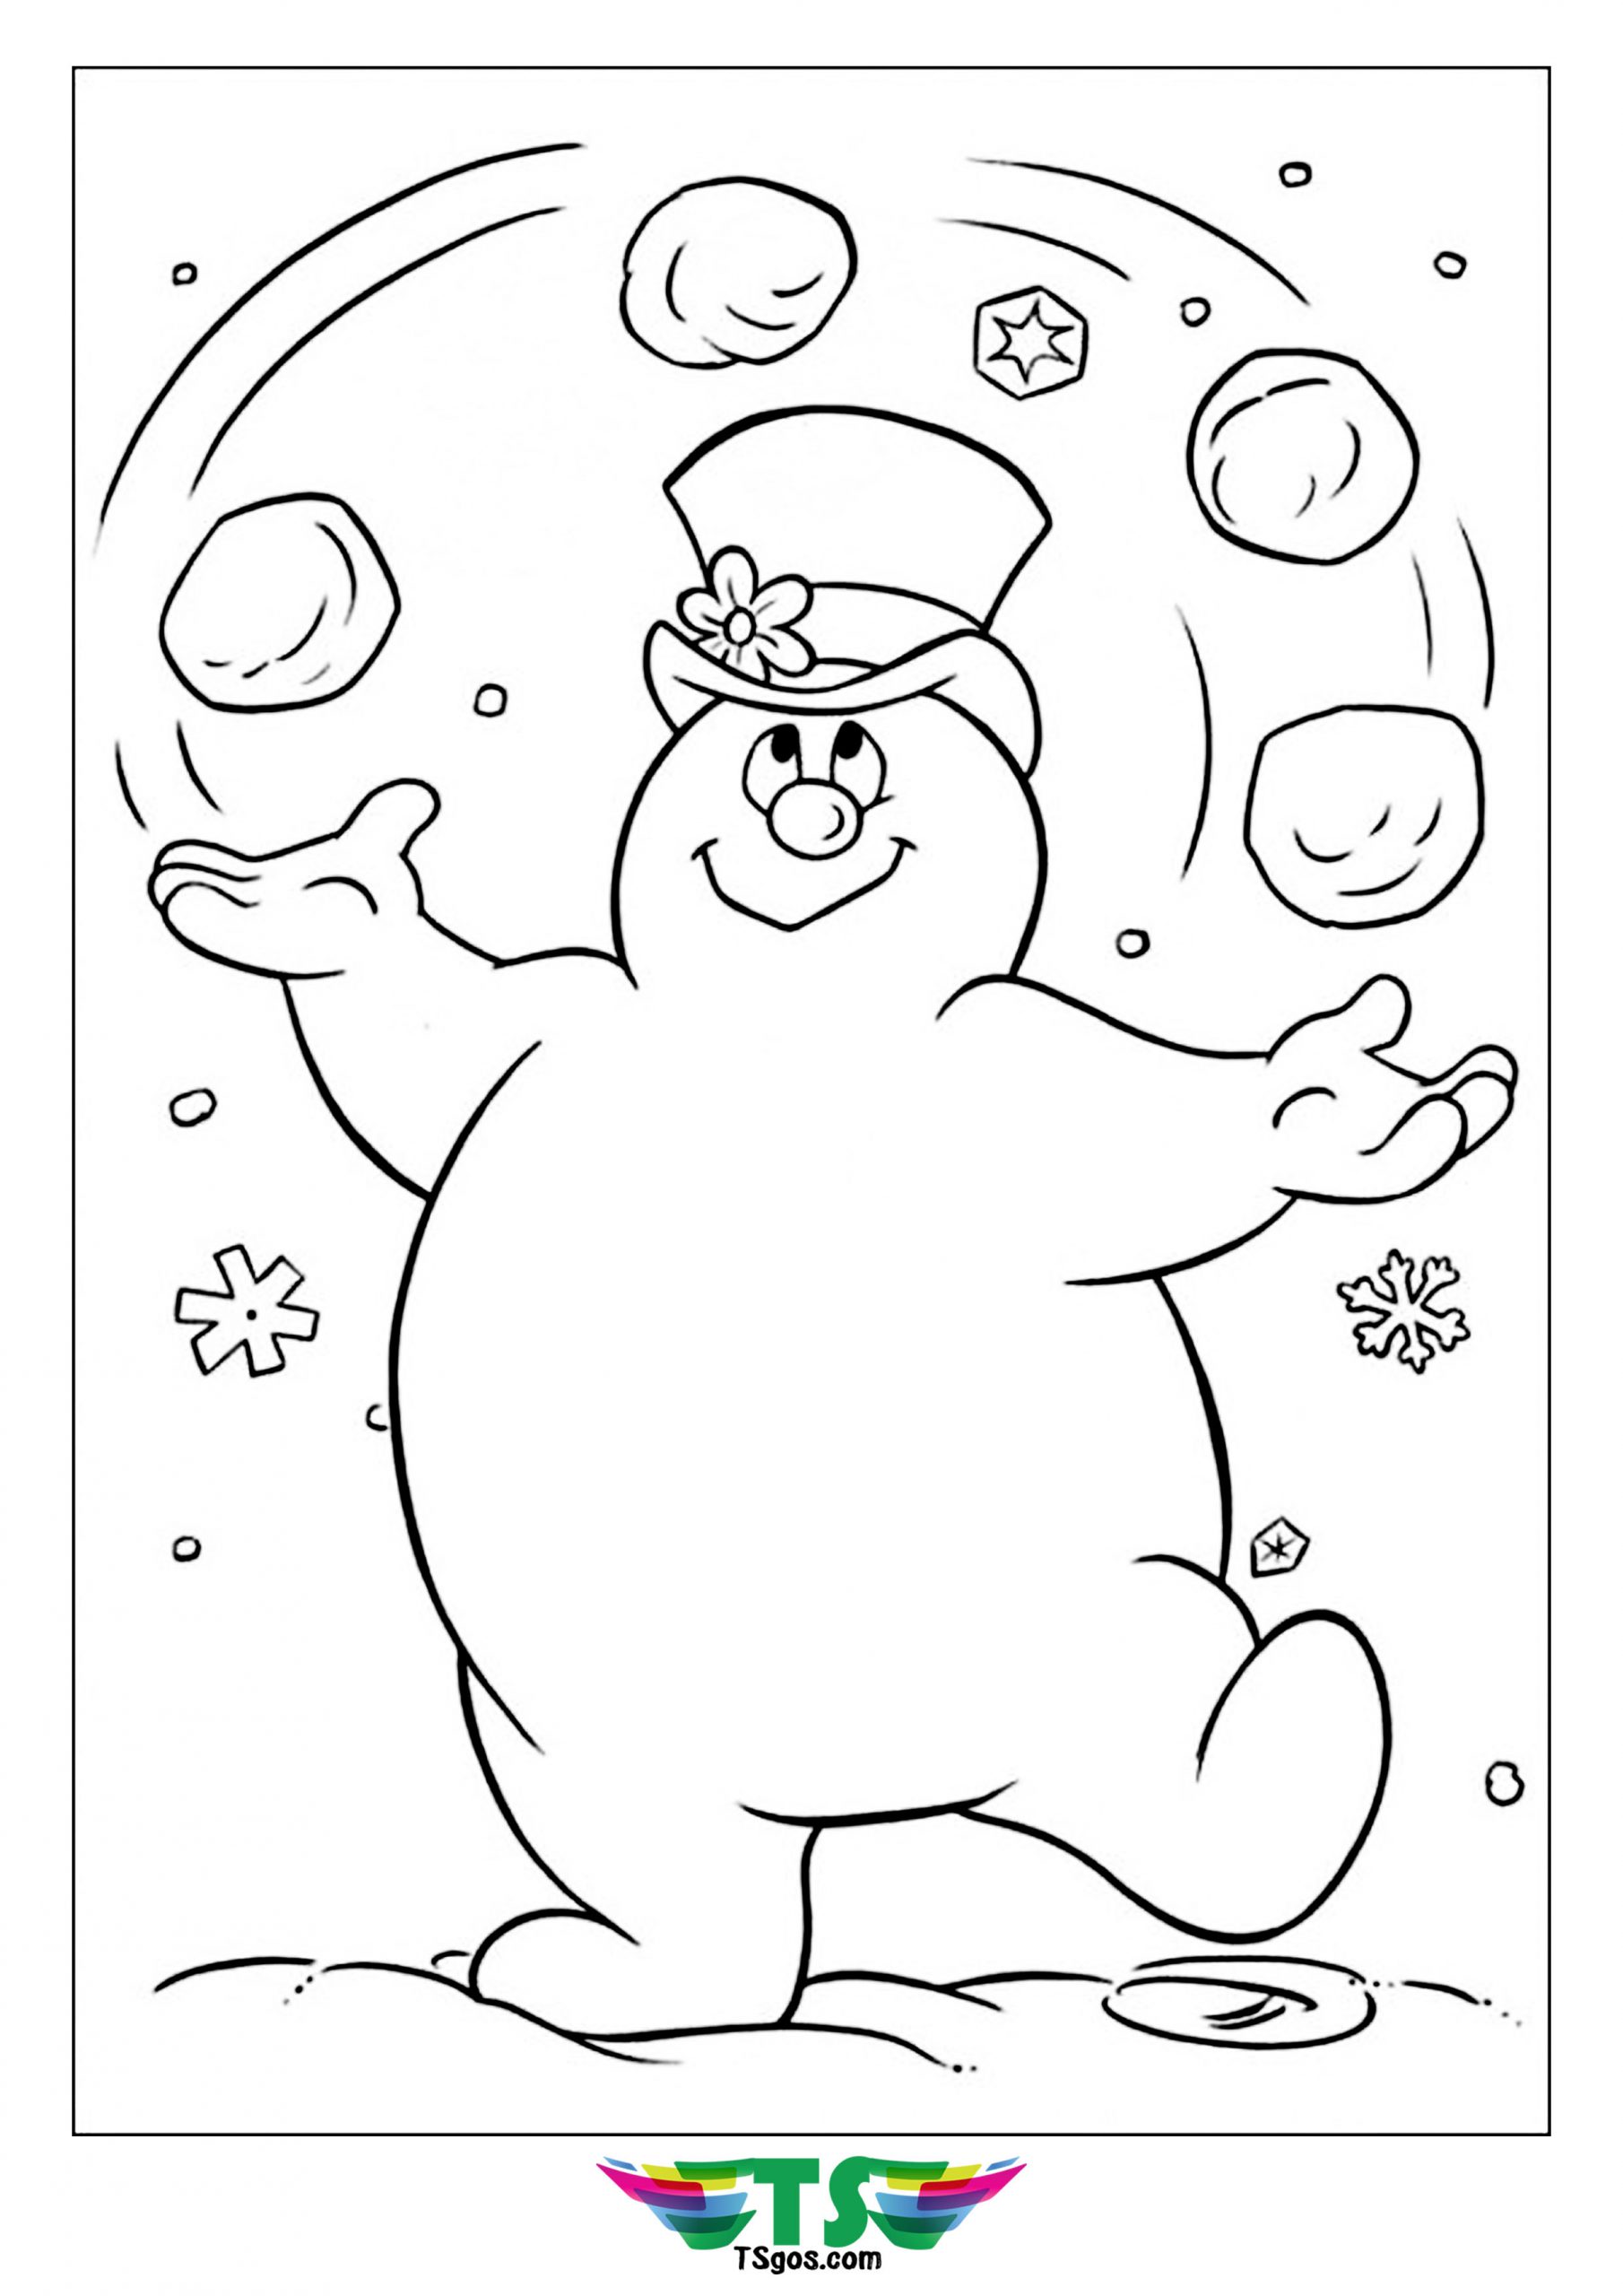 snowball-coloring-page-coloring-pages